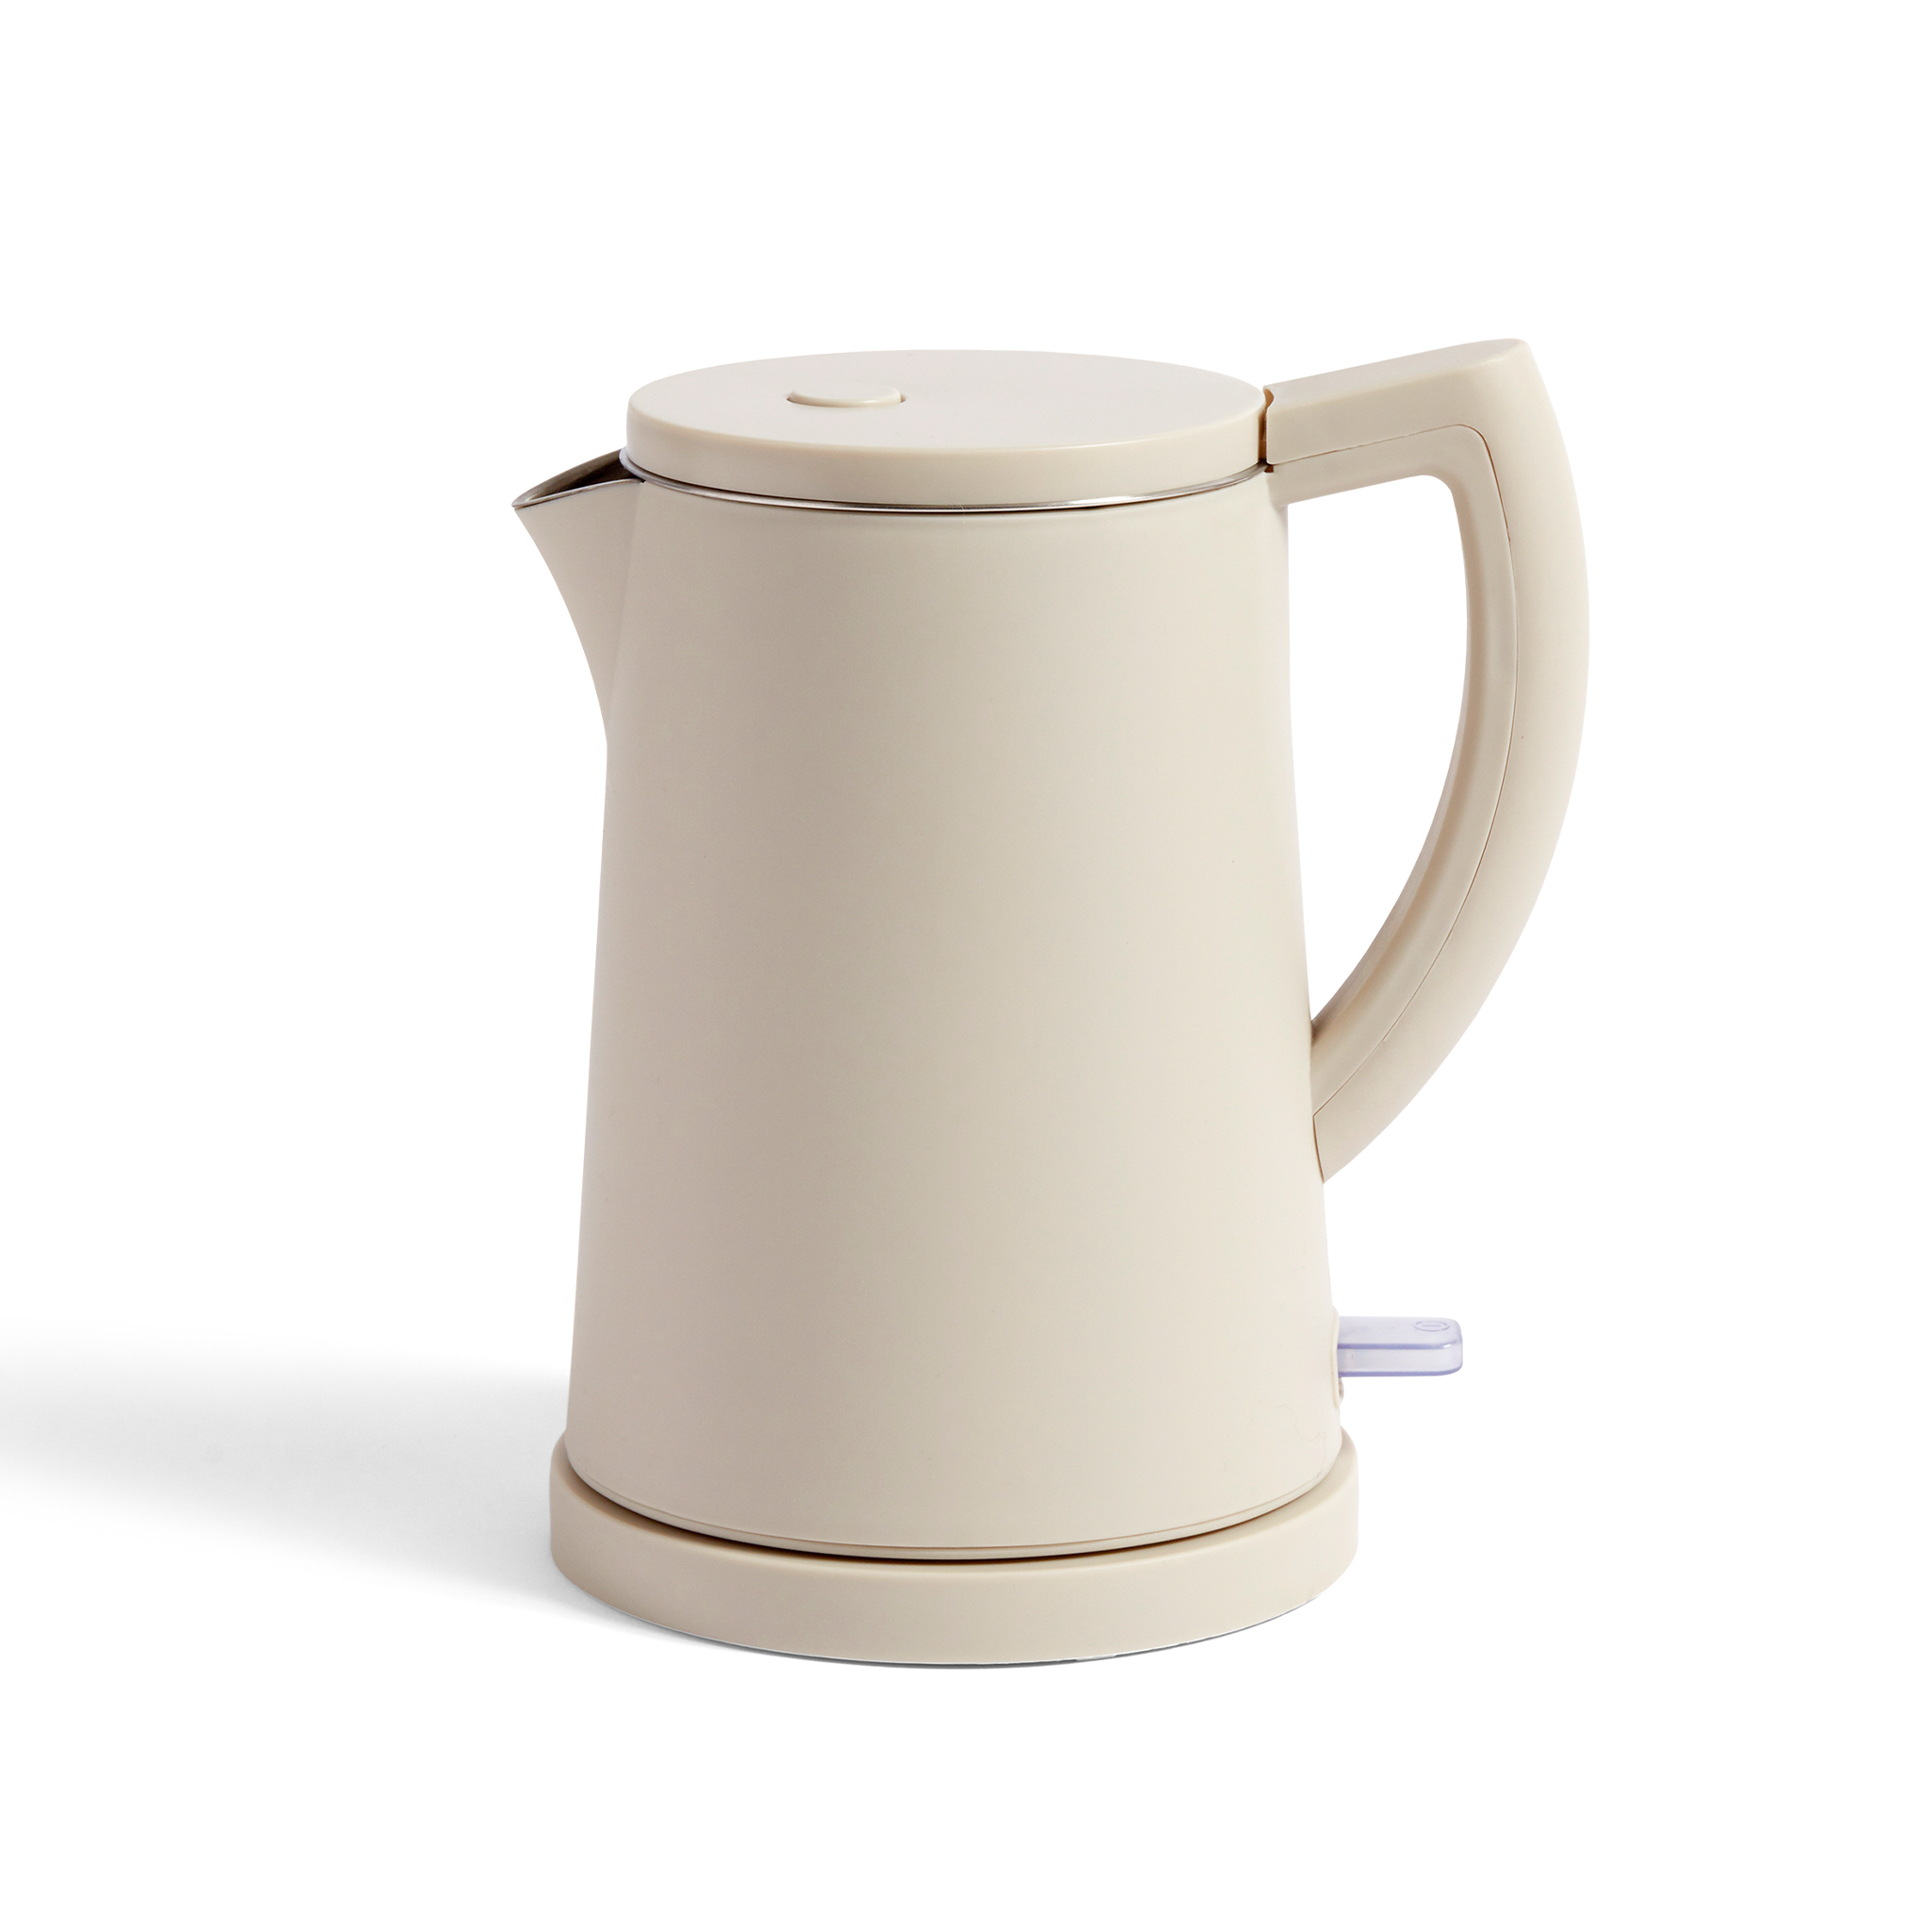 Kettle by George Sowden for Hay